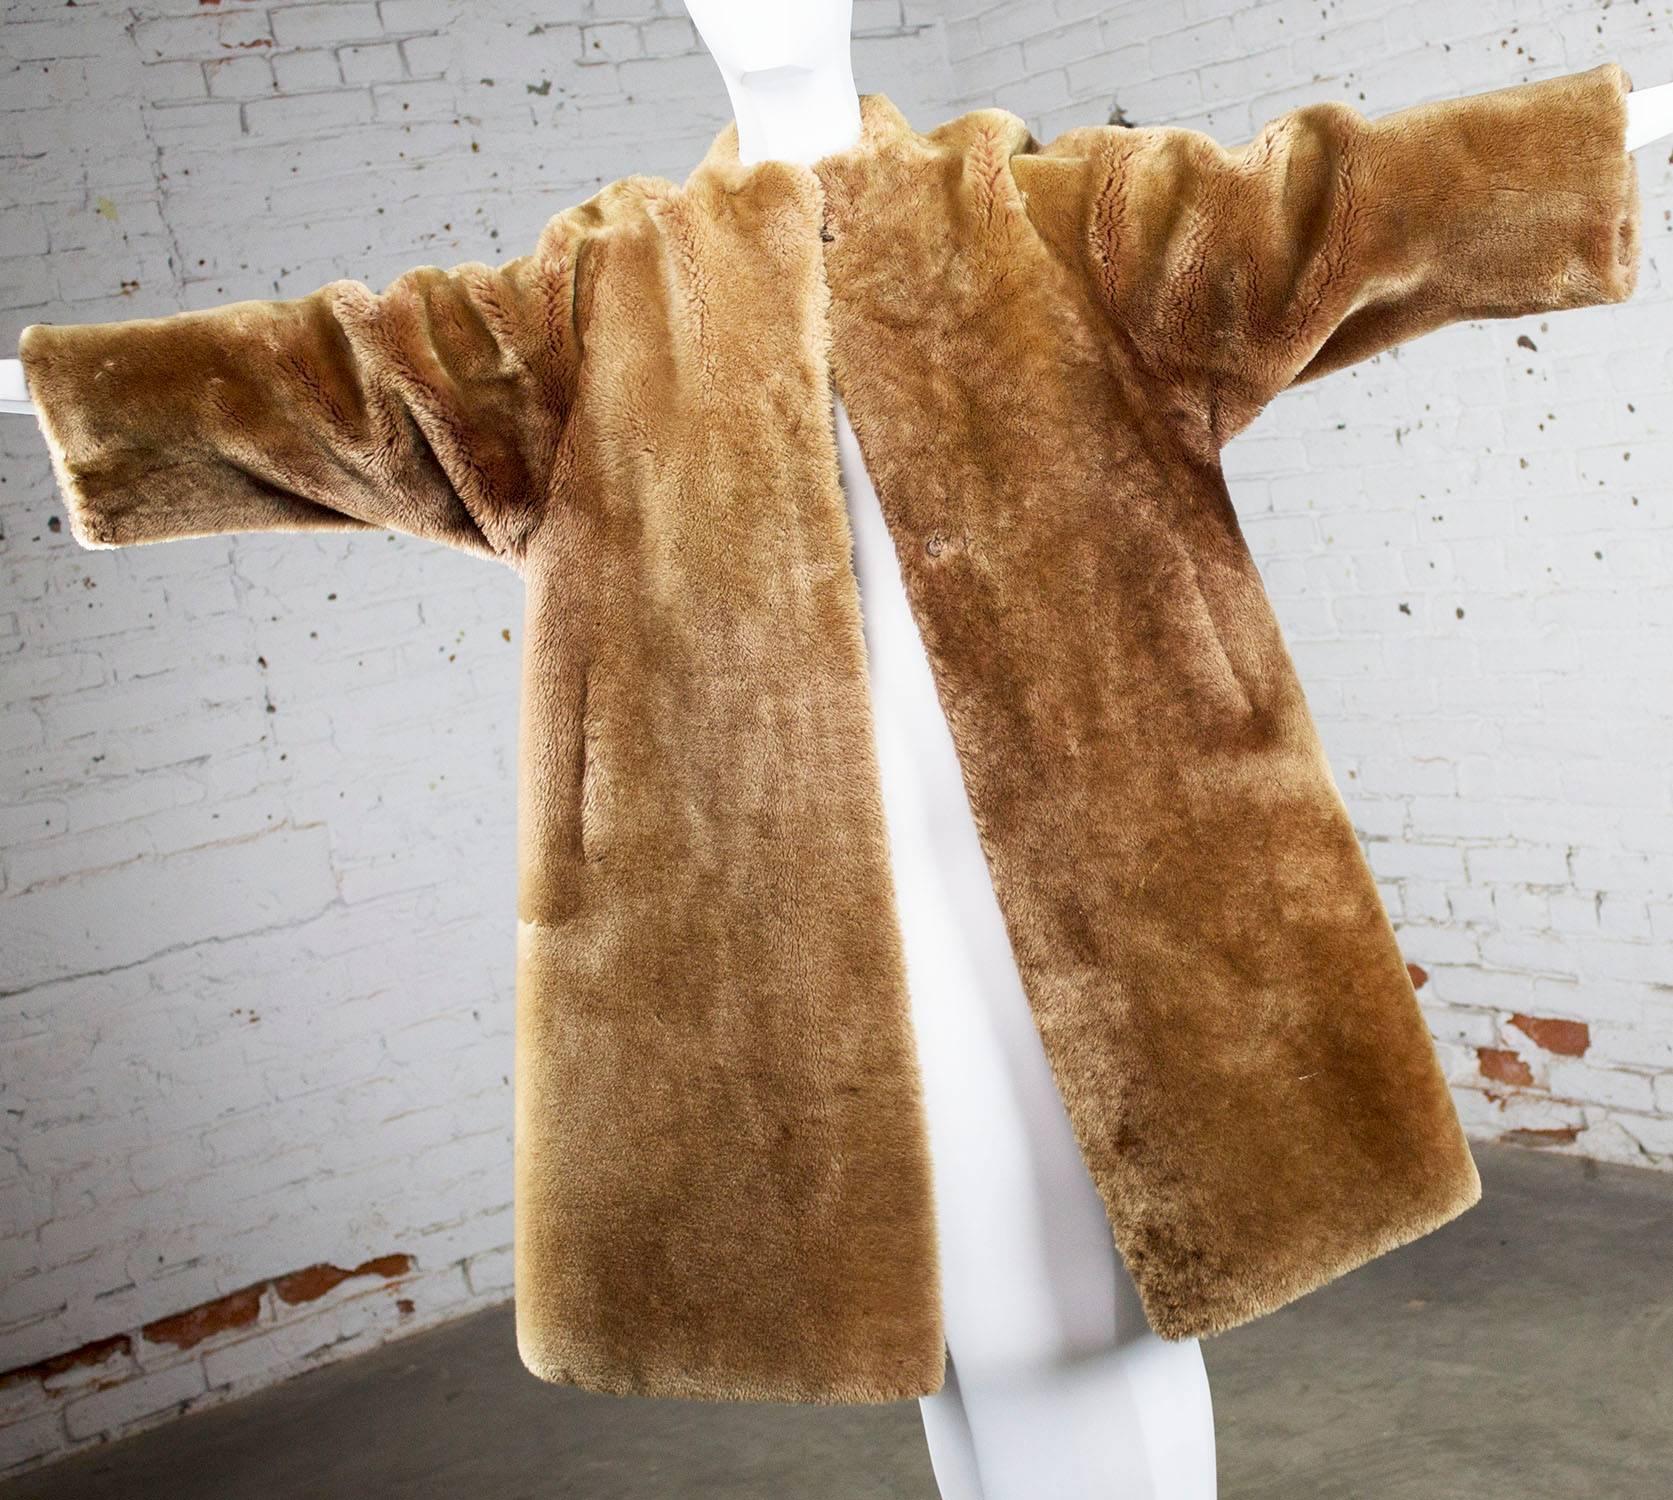 Gorgeous, luxurious and elegant vintage 1950s mouton fur swing style coat in wonderful vintage condition.

Beautiful, elegant, extremely warm. These are the three best descriptors for this wonderful vintage 1950s mouton fur swing style coat. This